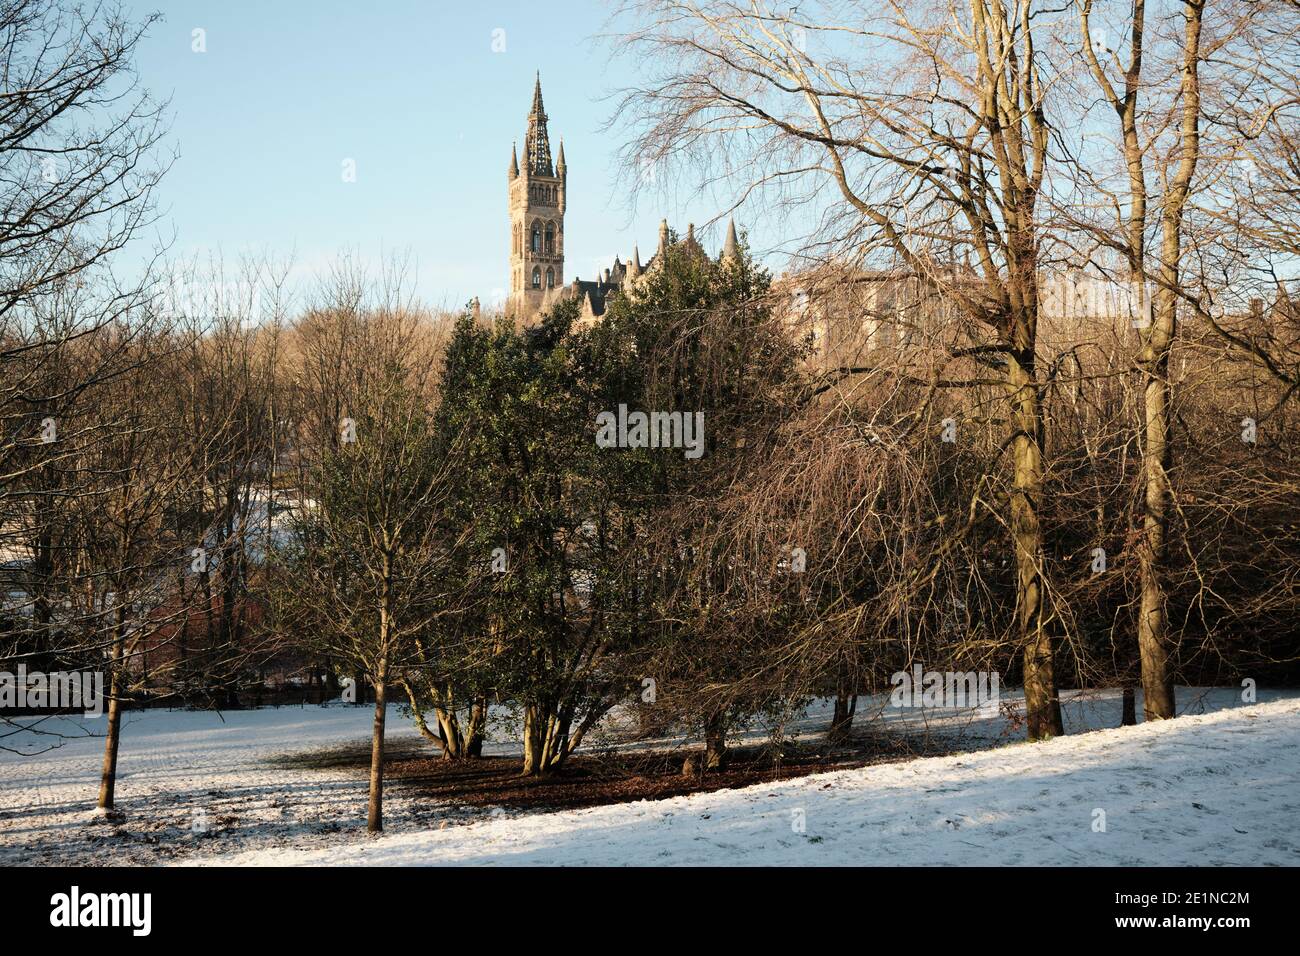 University of Glasgow tower from Kelvingrove Park. Sunny day in winter. Glasgow. January 2021 Stock Photo